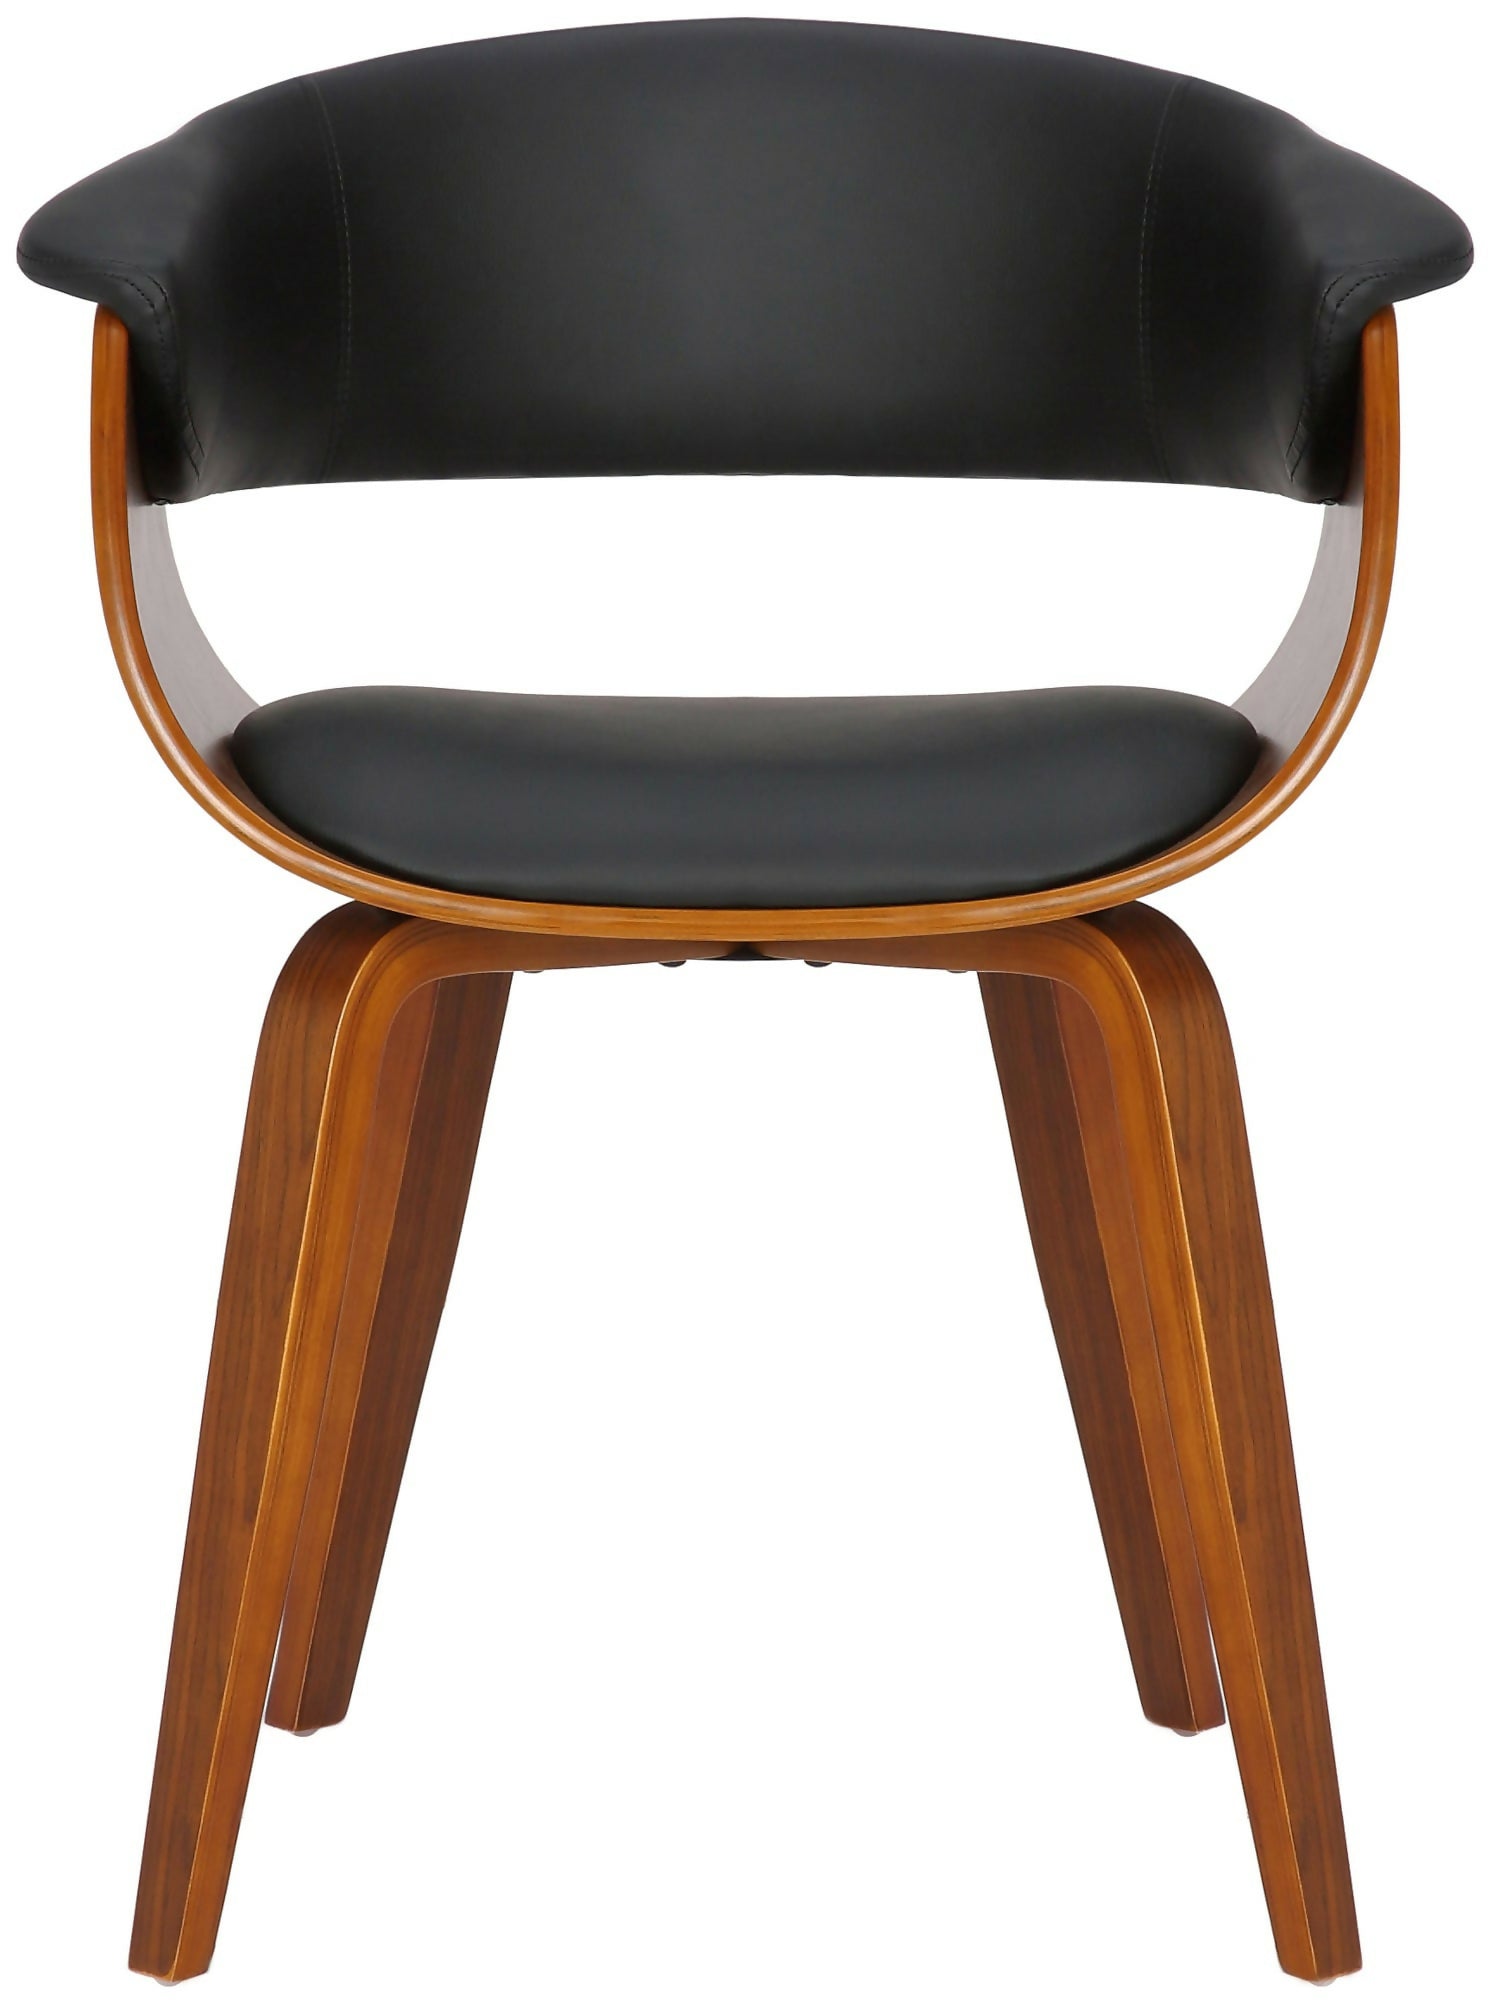 Bruce Faux Leather Dining Chair - Black